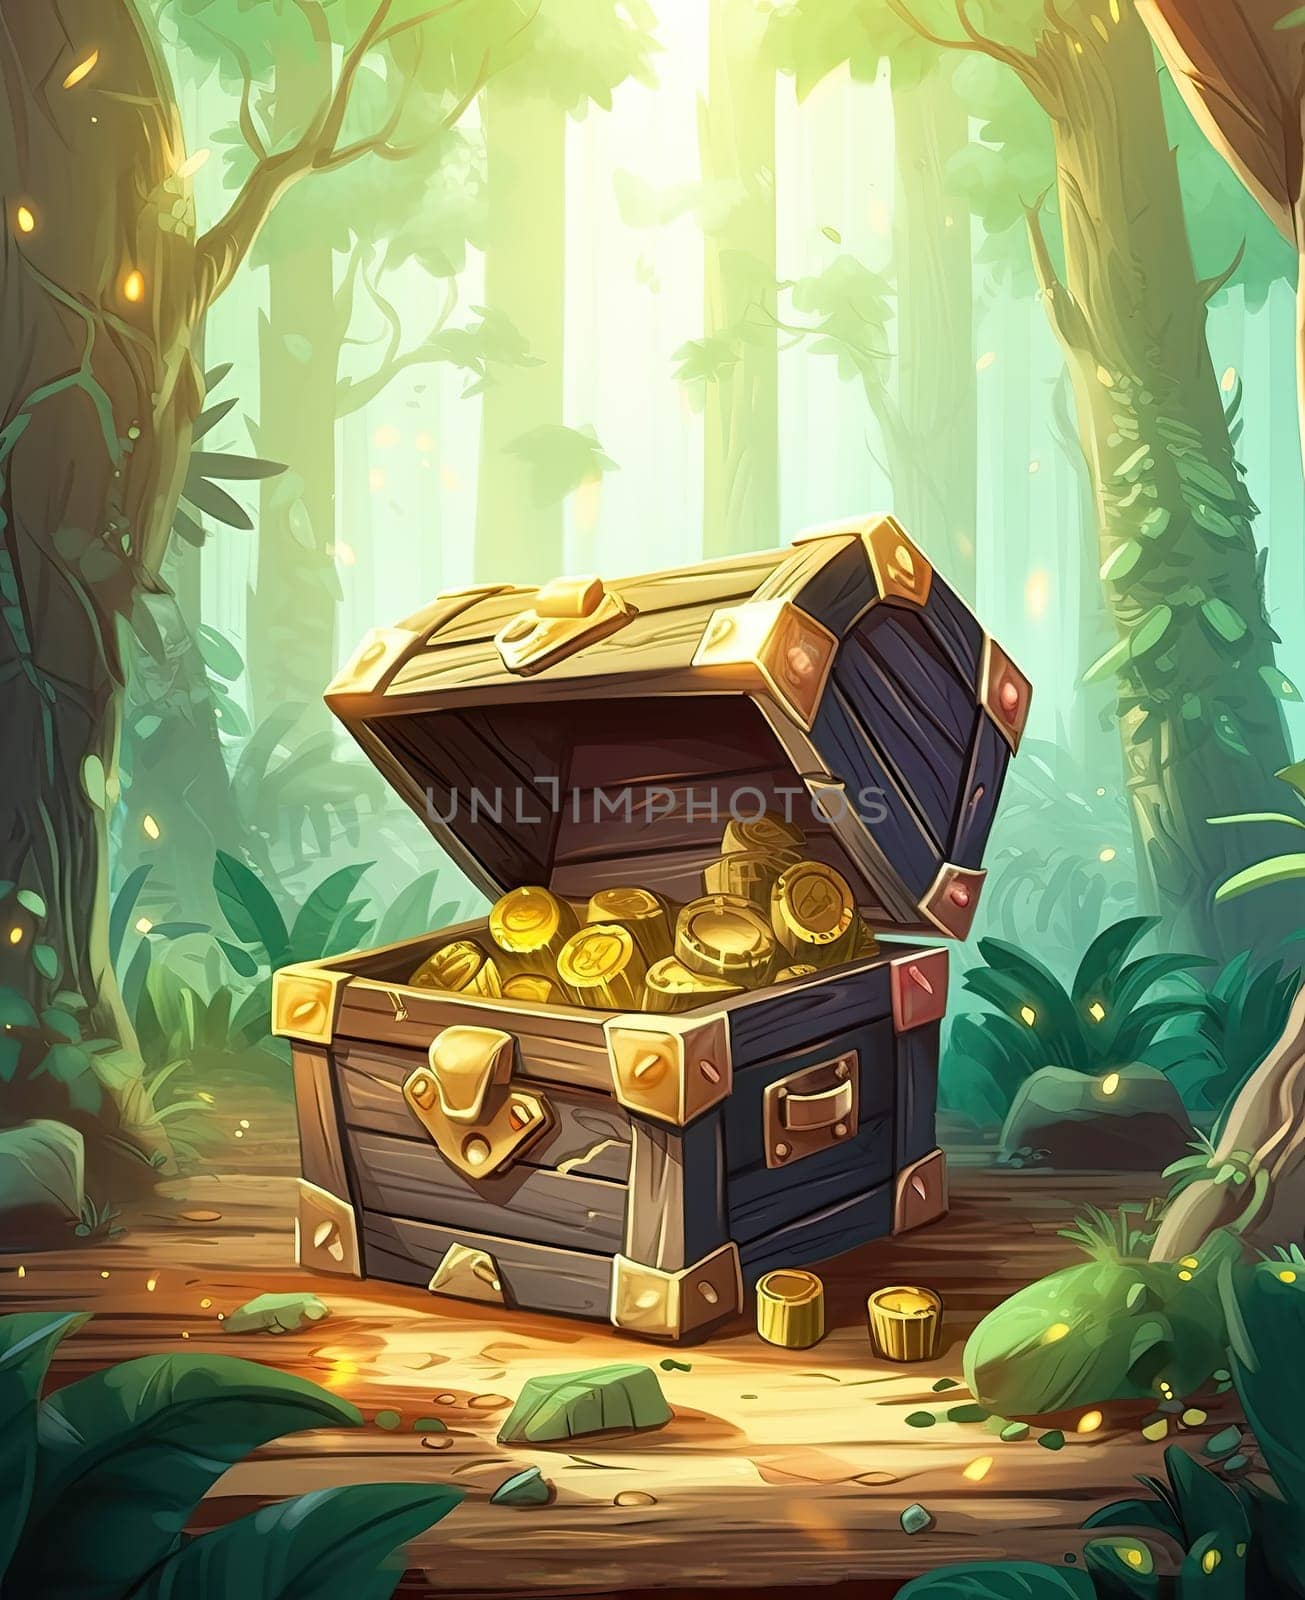 Illustration of a wooden chest in the forest. by Fischeron